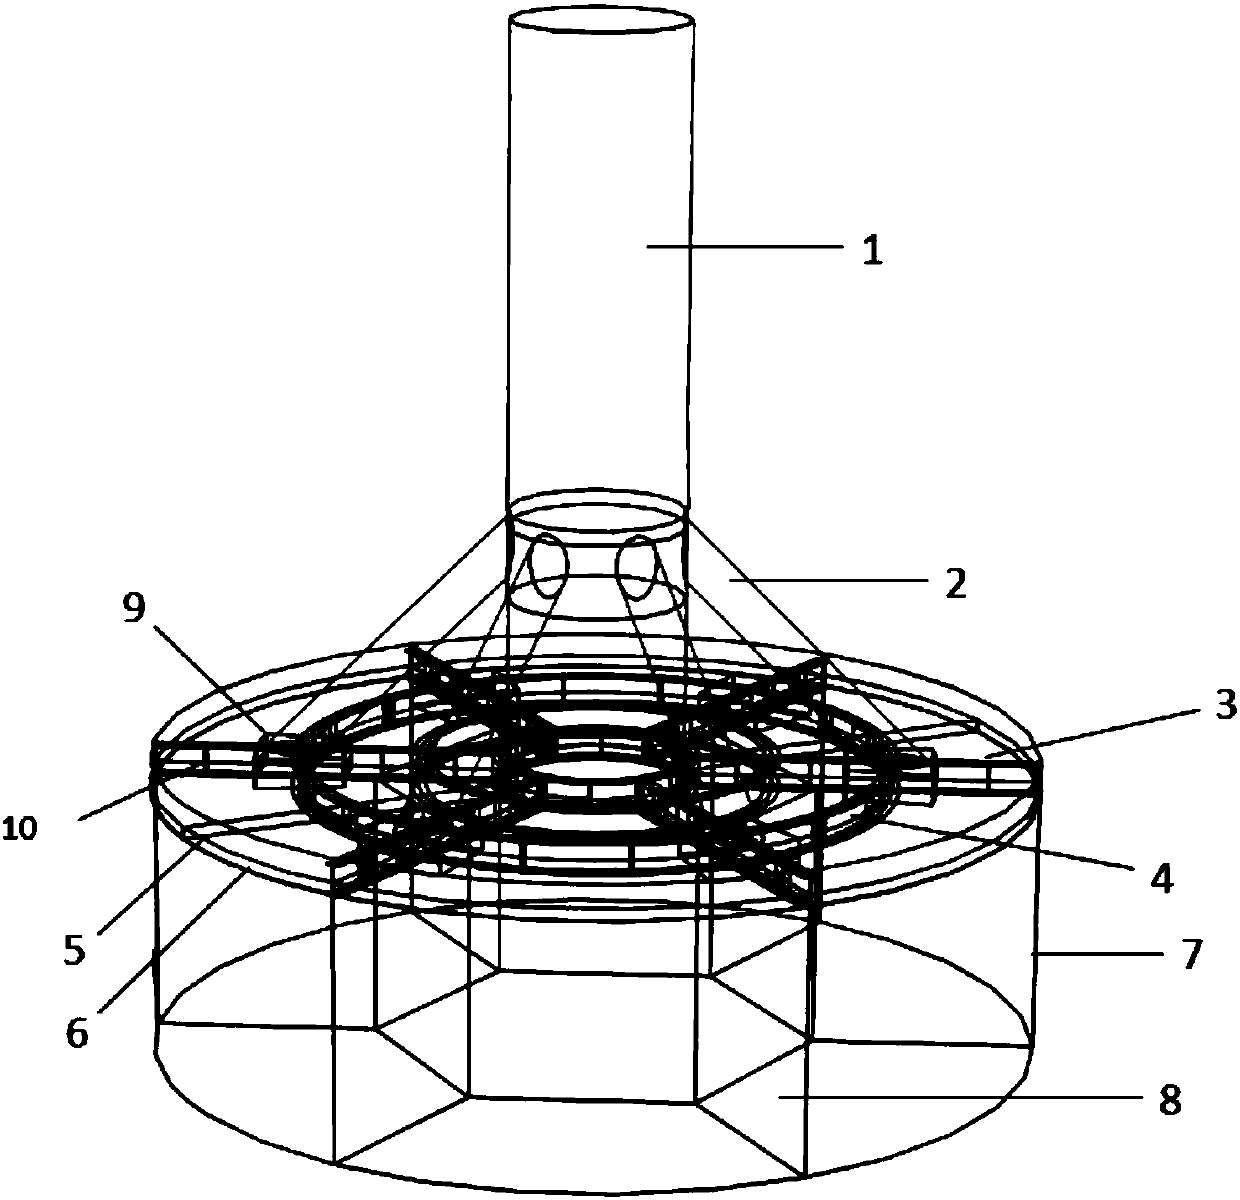 Offshore wind power combined barrel-shaped base